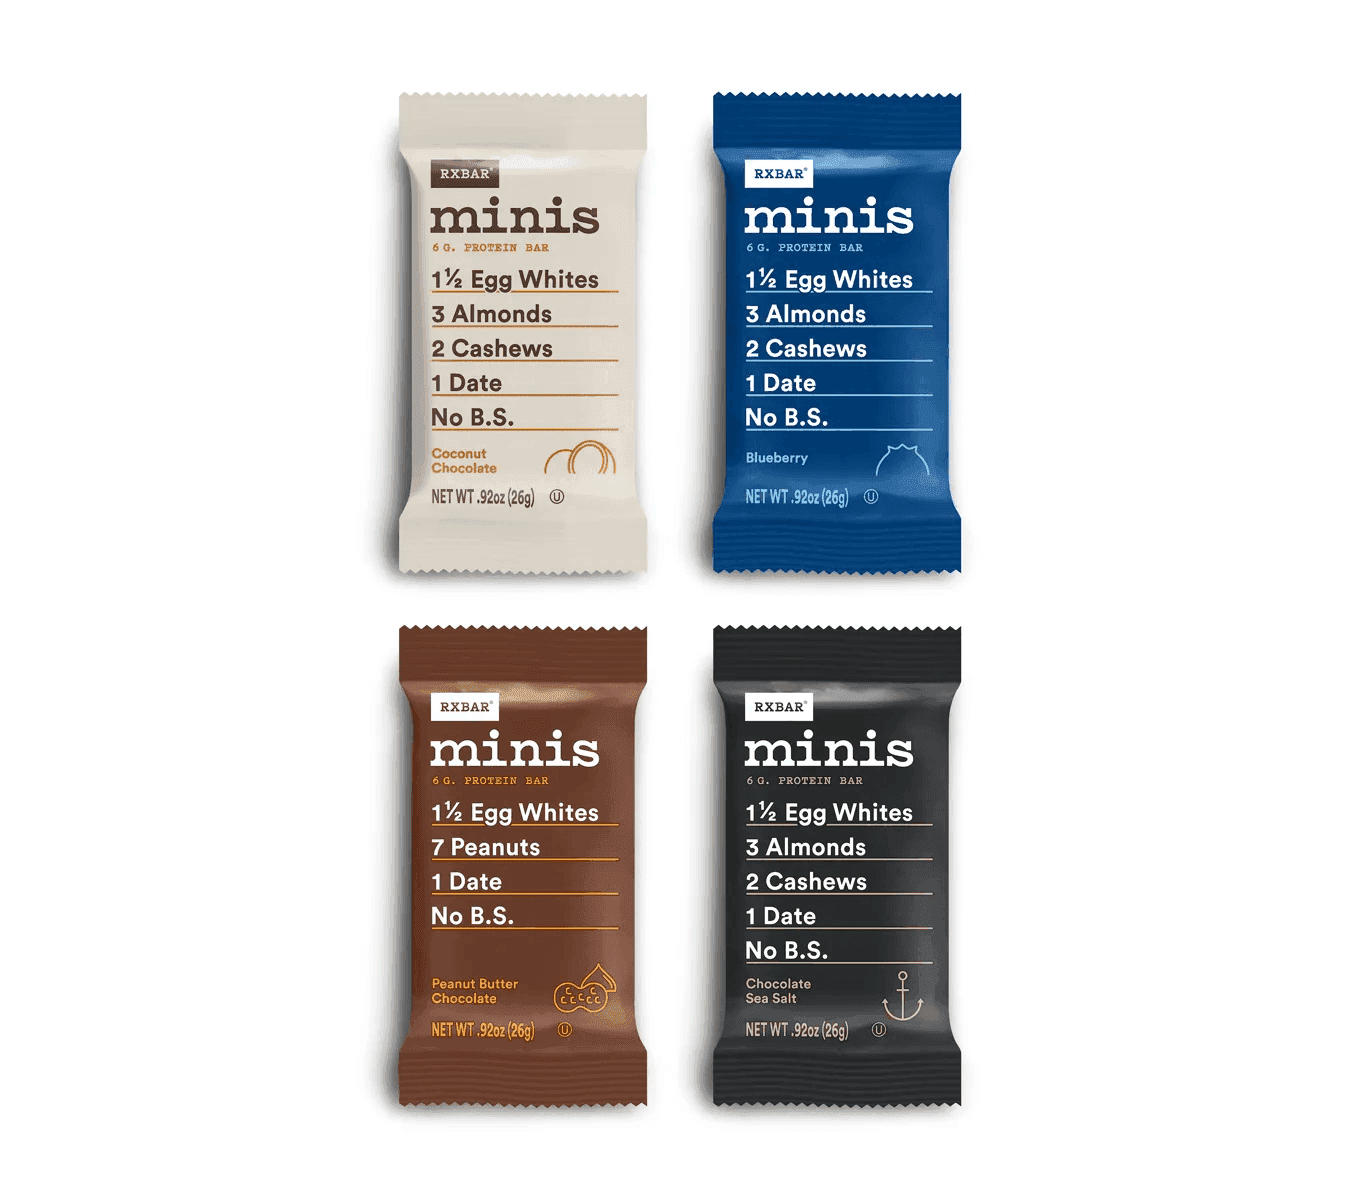 Example of product packaging from RXBAR